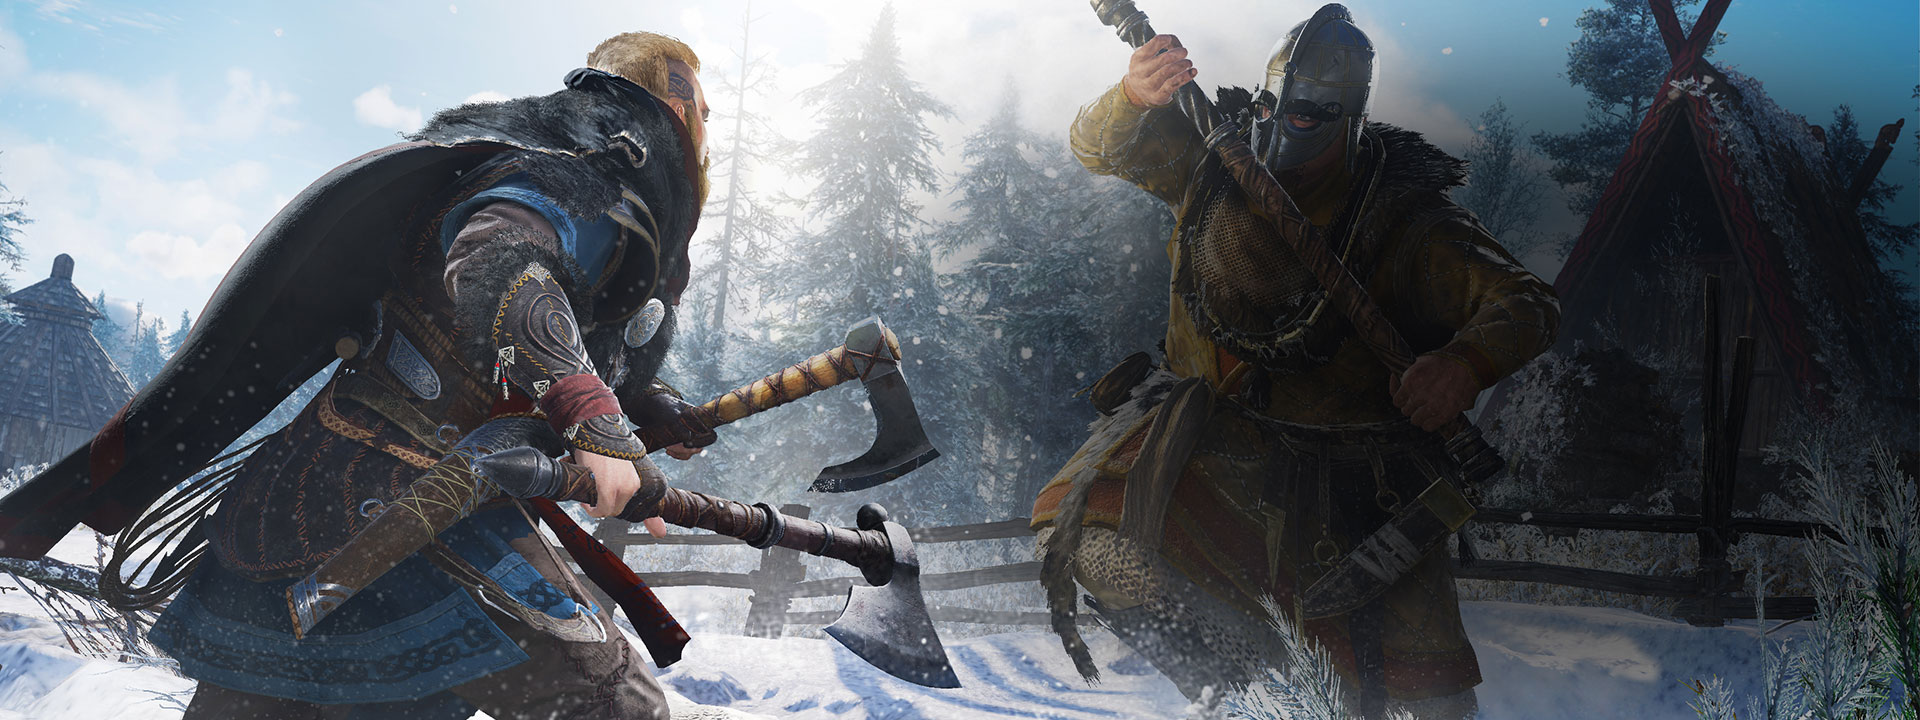 Two characters from Assassin’s Creed Valhalla fighting in the snow